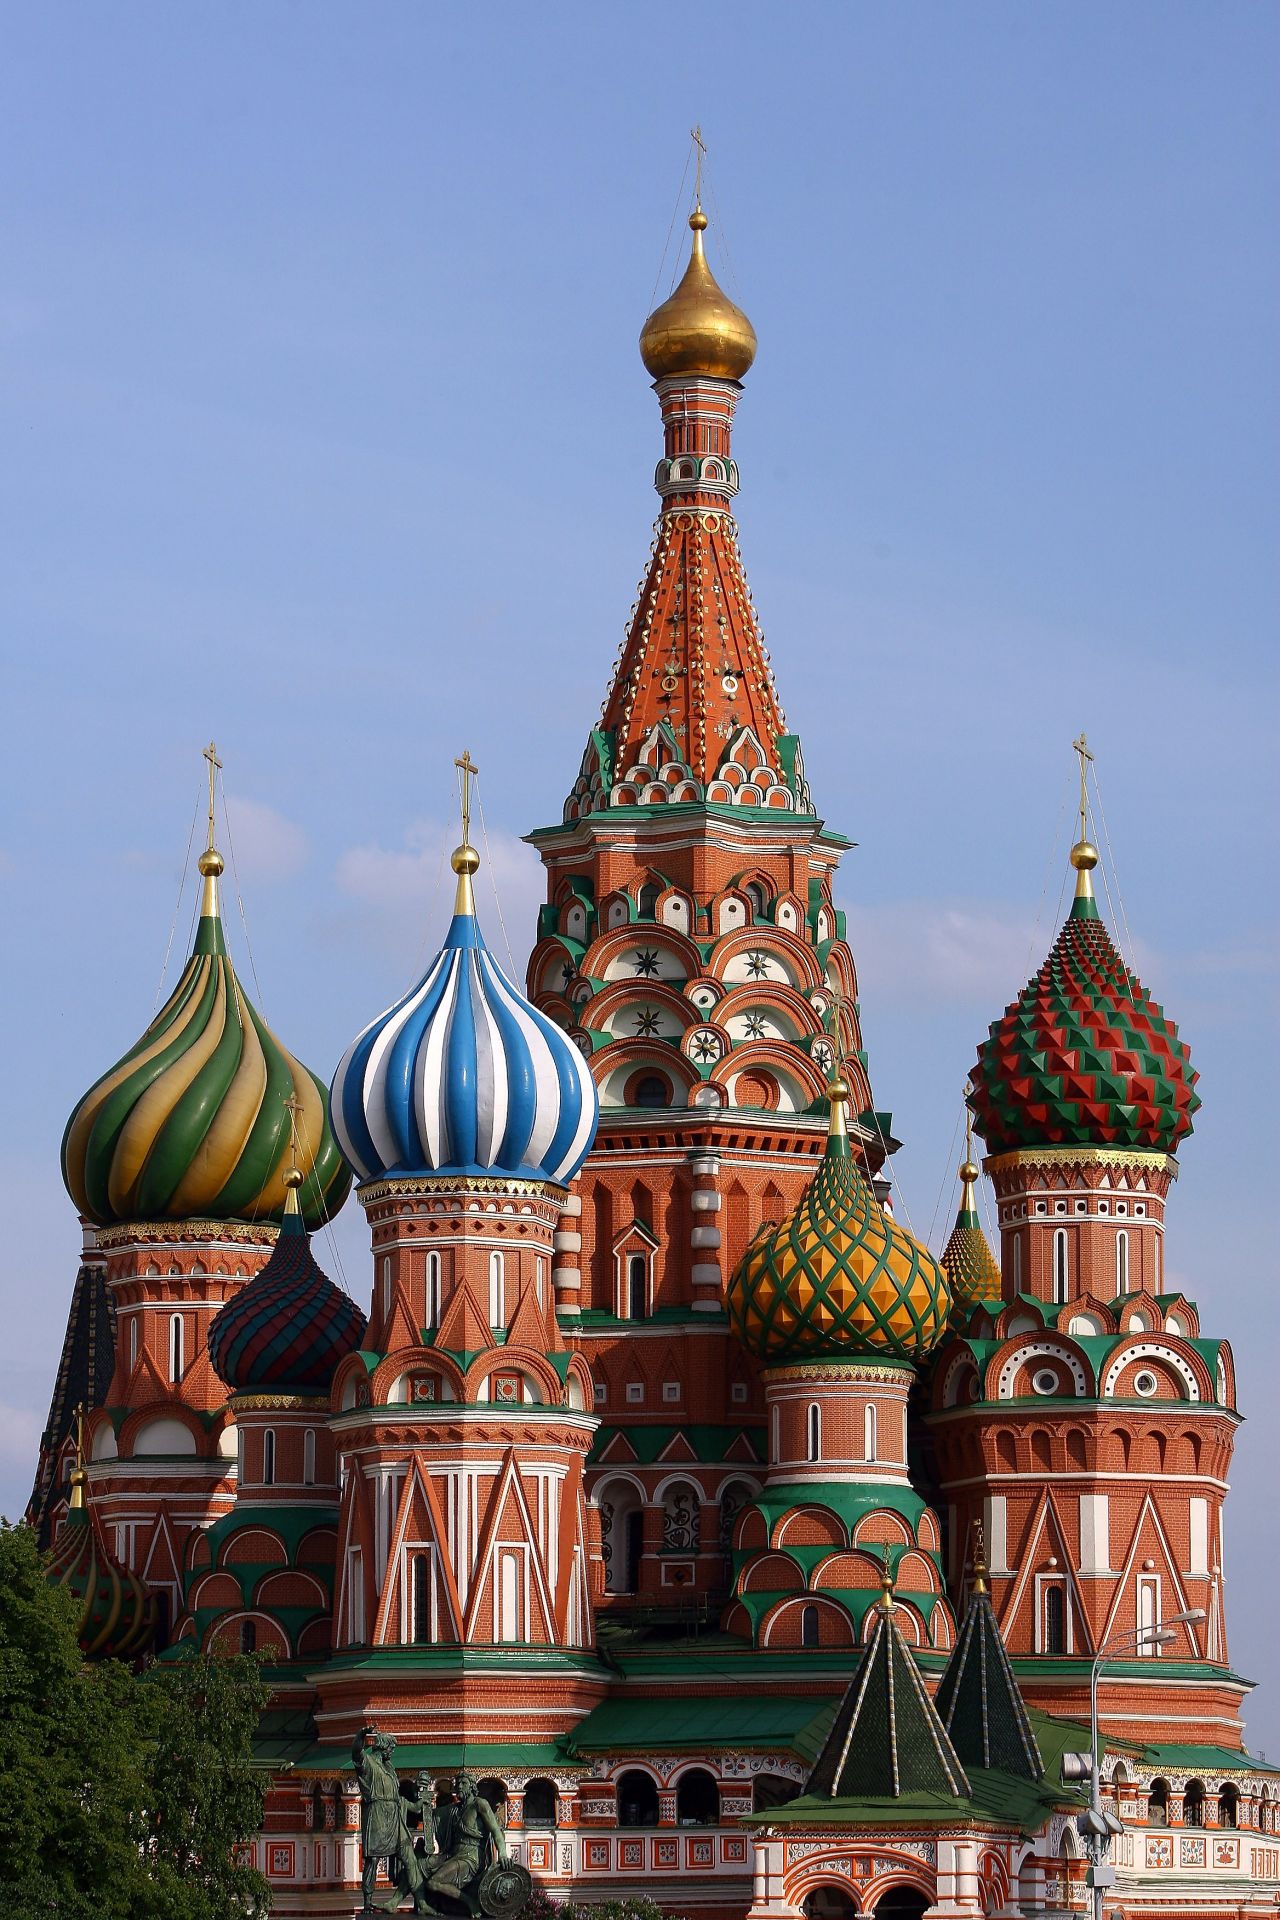 Moscow, Russia -- St Basil's Cathedral was built during the 16th century by Ivan IV or, as he was nicknamed, Ivan the Terrible. The structure's design and color was modified throughout its history.